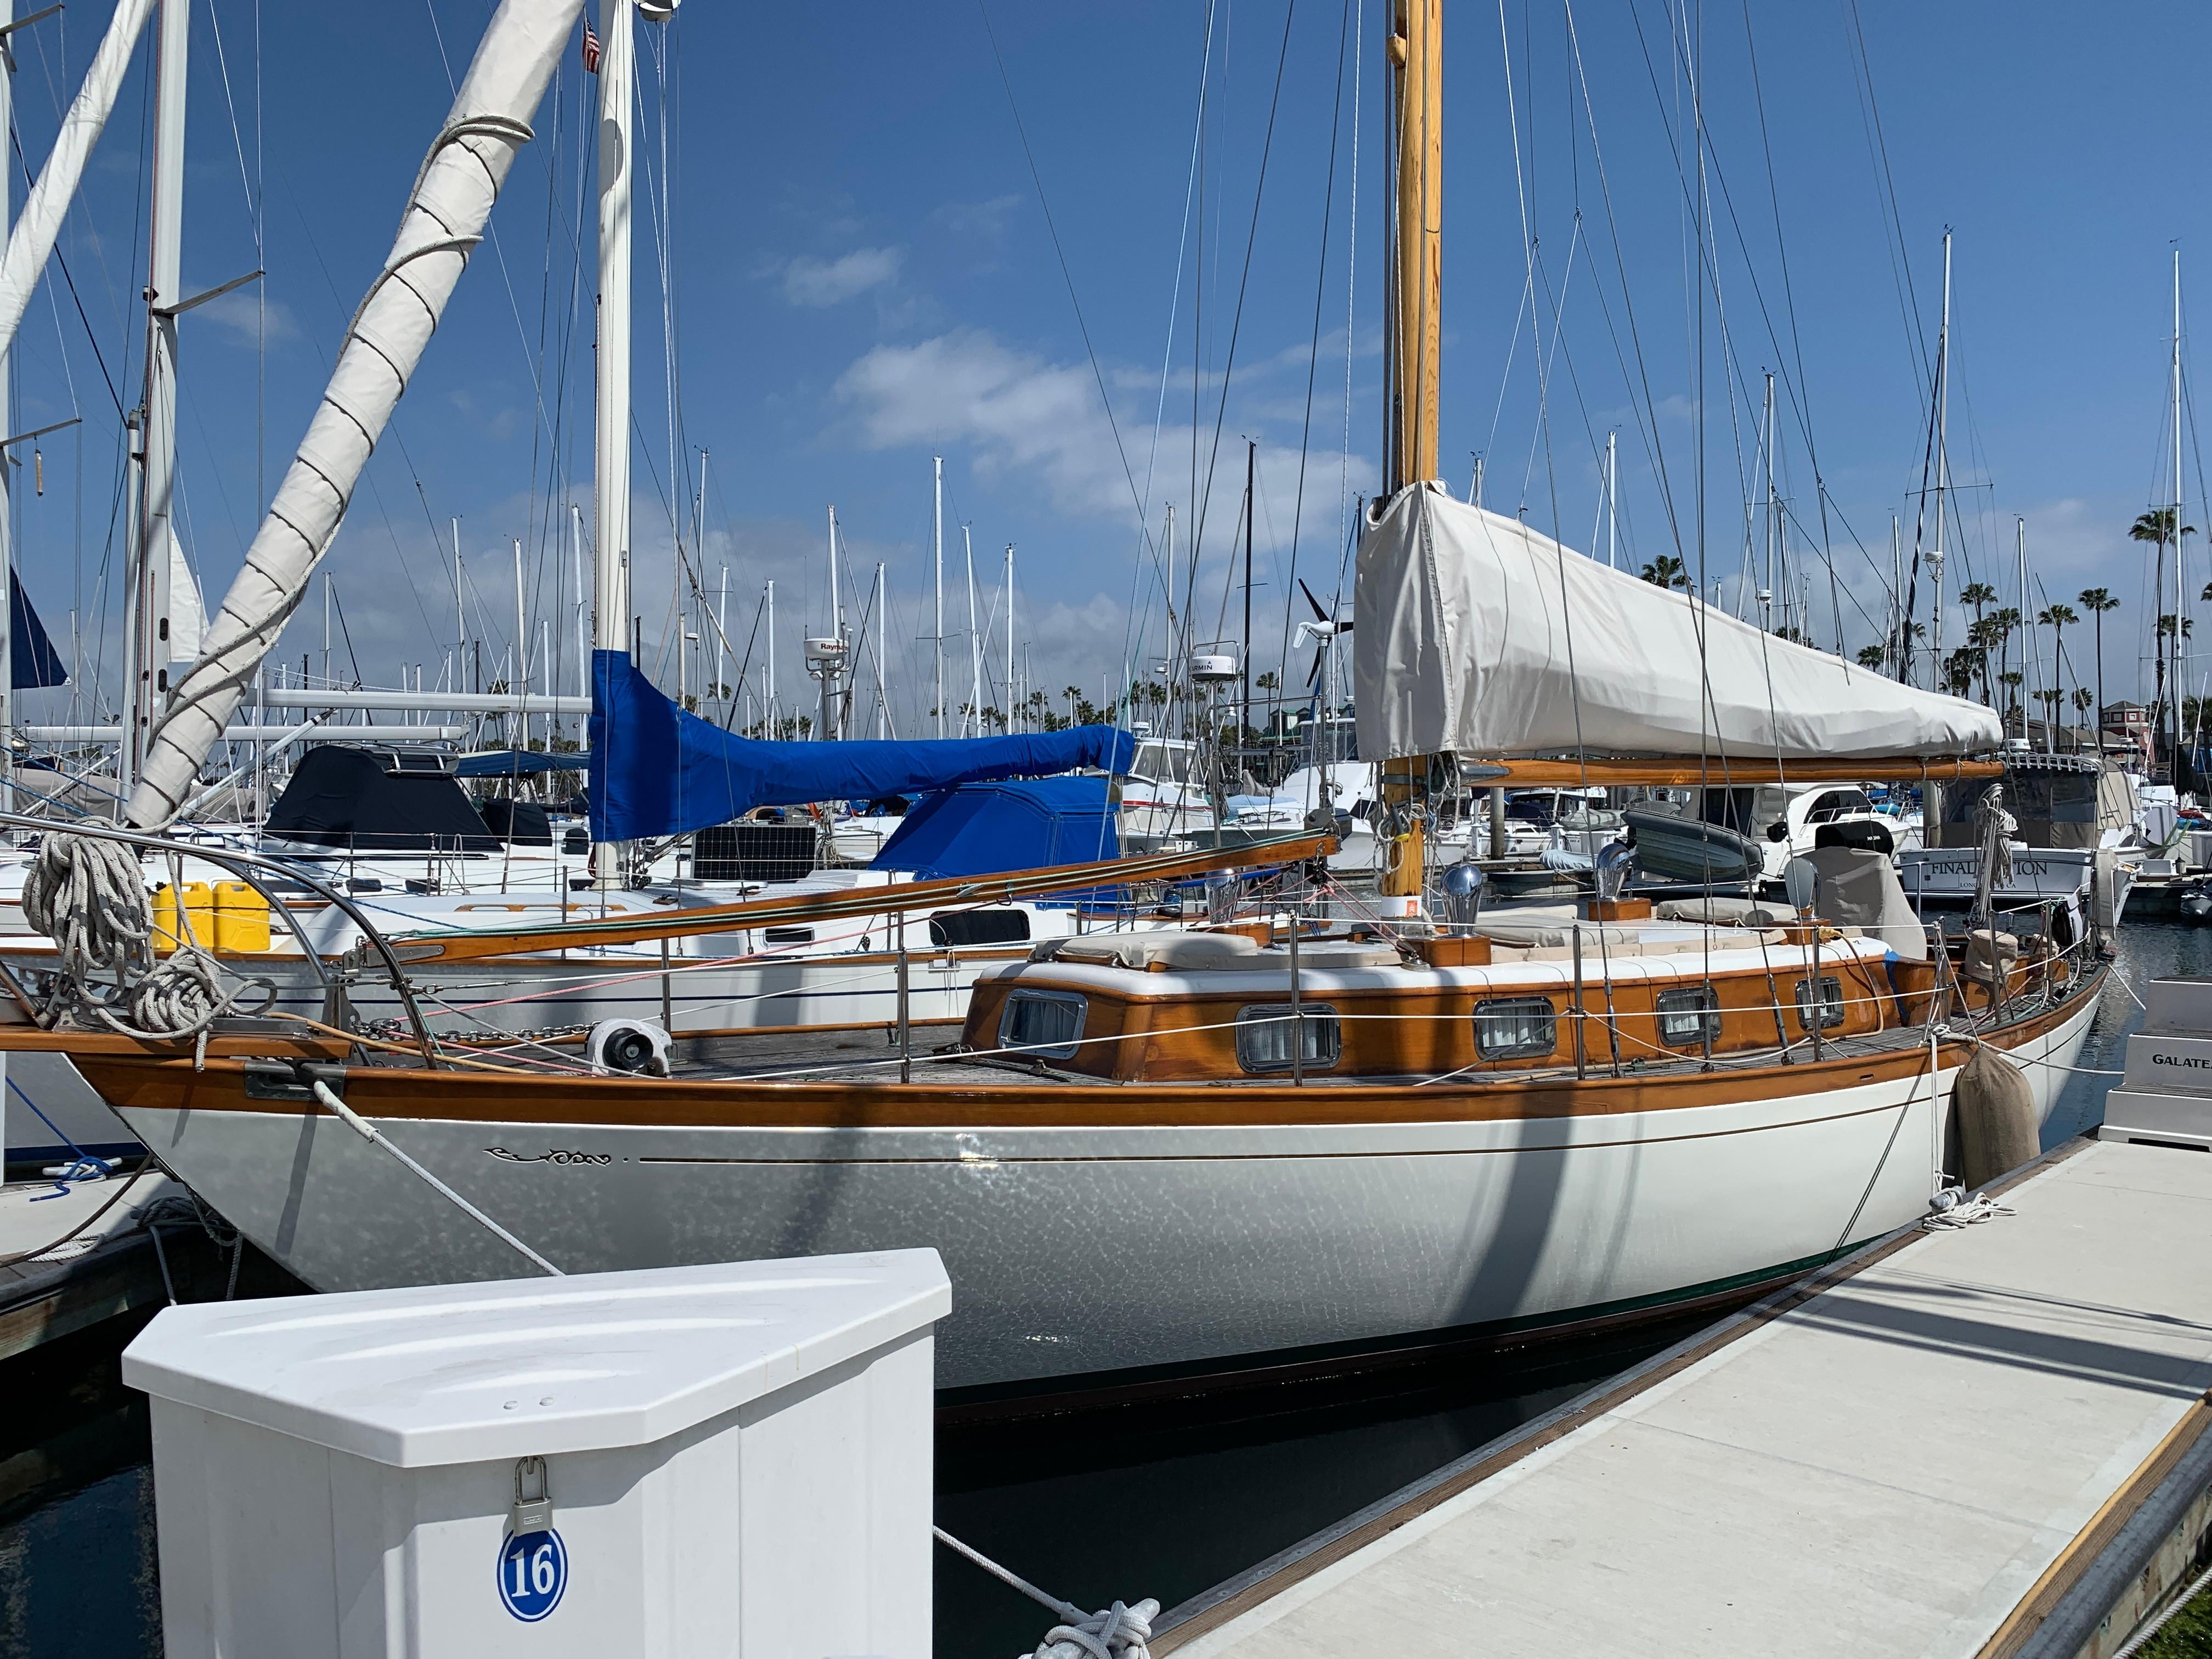 41 Cheoy Lee 1973 Long Beach, California Sold on 2020-09-02 by Denison Yacht  Sales